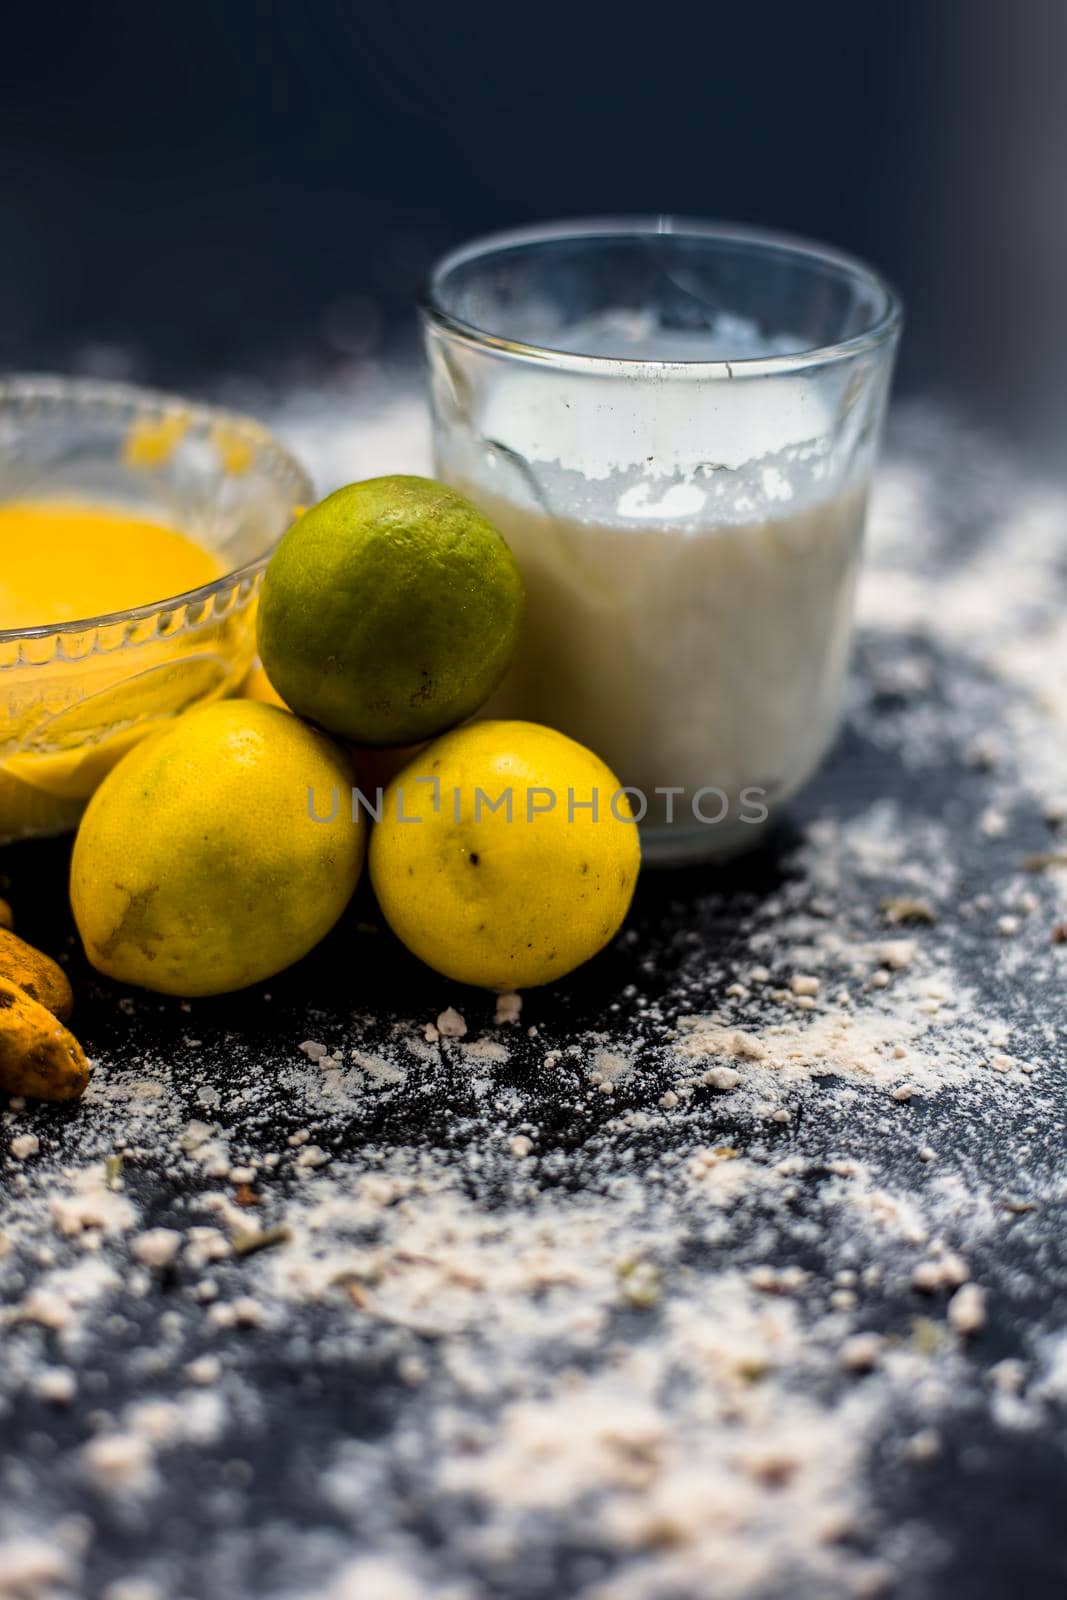 Lemon face mask on the wooden surface consisting lemon juice, gram flour or chickpea flour, turmeric or Haldi and milk in a glass bowl.For the treatment of tans.